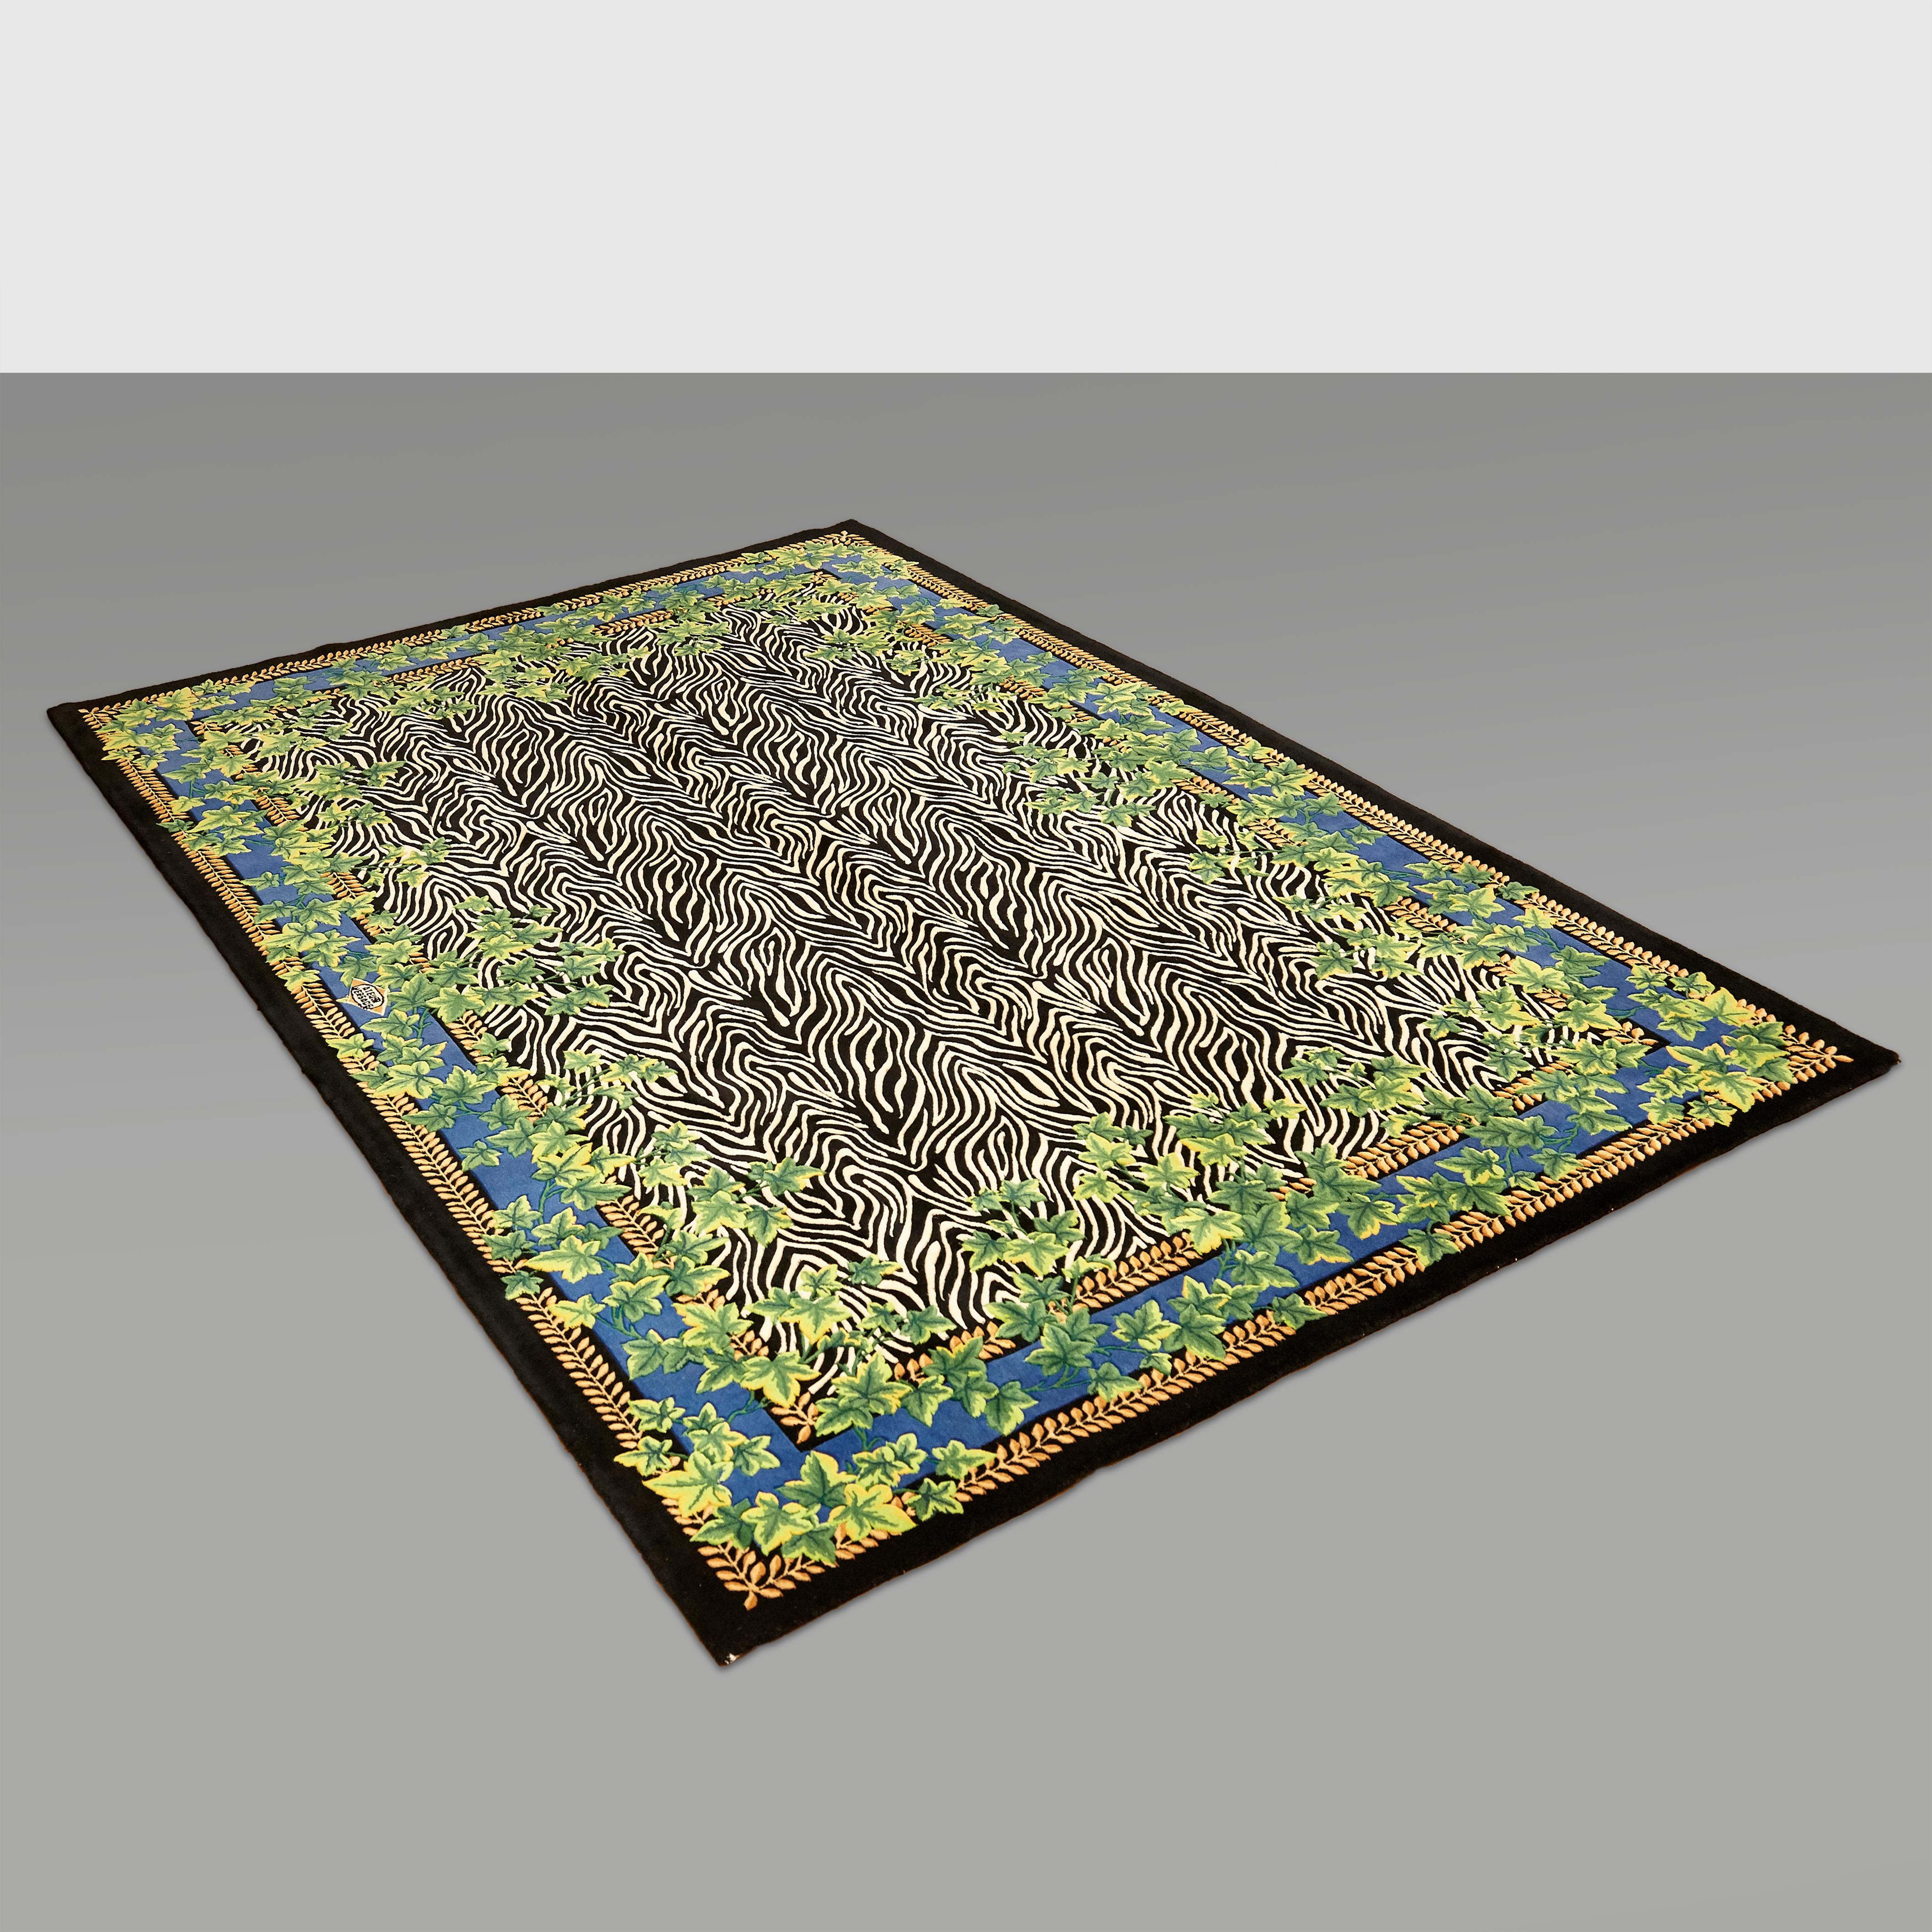 Gianni Versace Collection Rug Wild Ivy, Gold Zebra Animal Print, 1980 In Good Condition For Sale In Barcelona, Barcelona